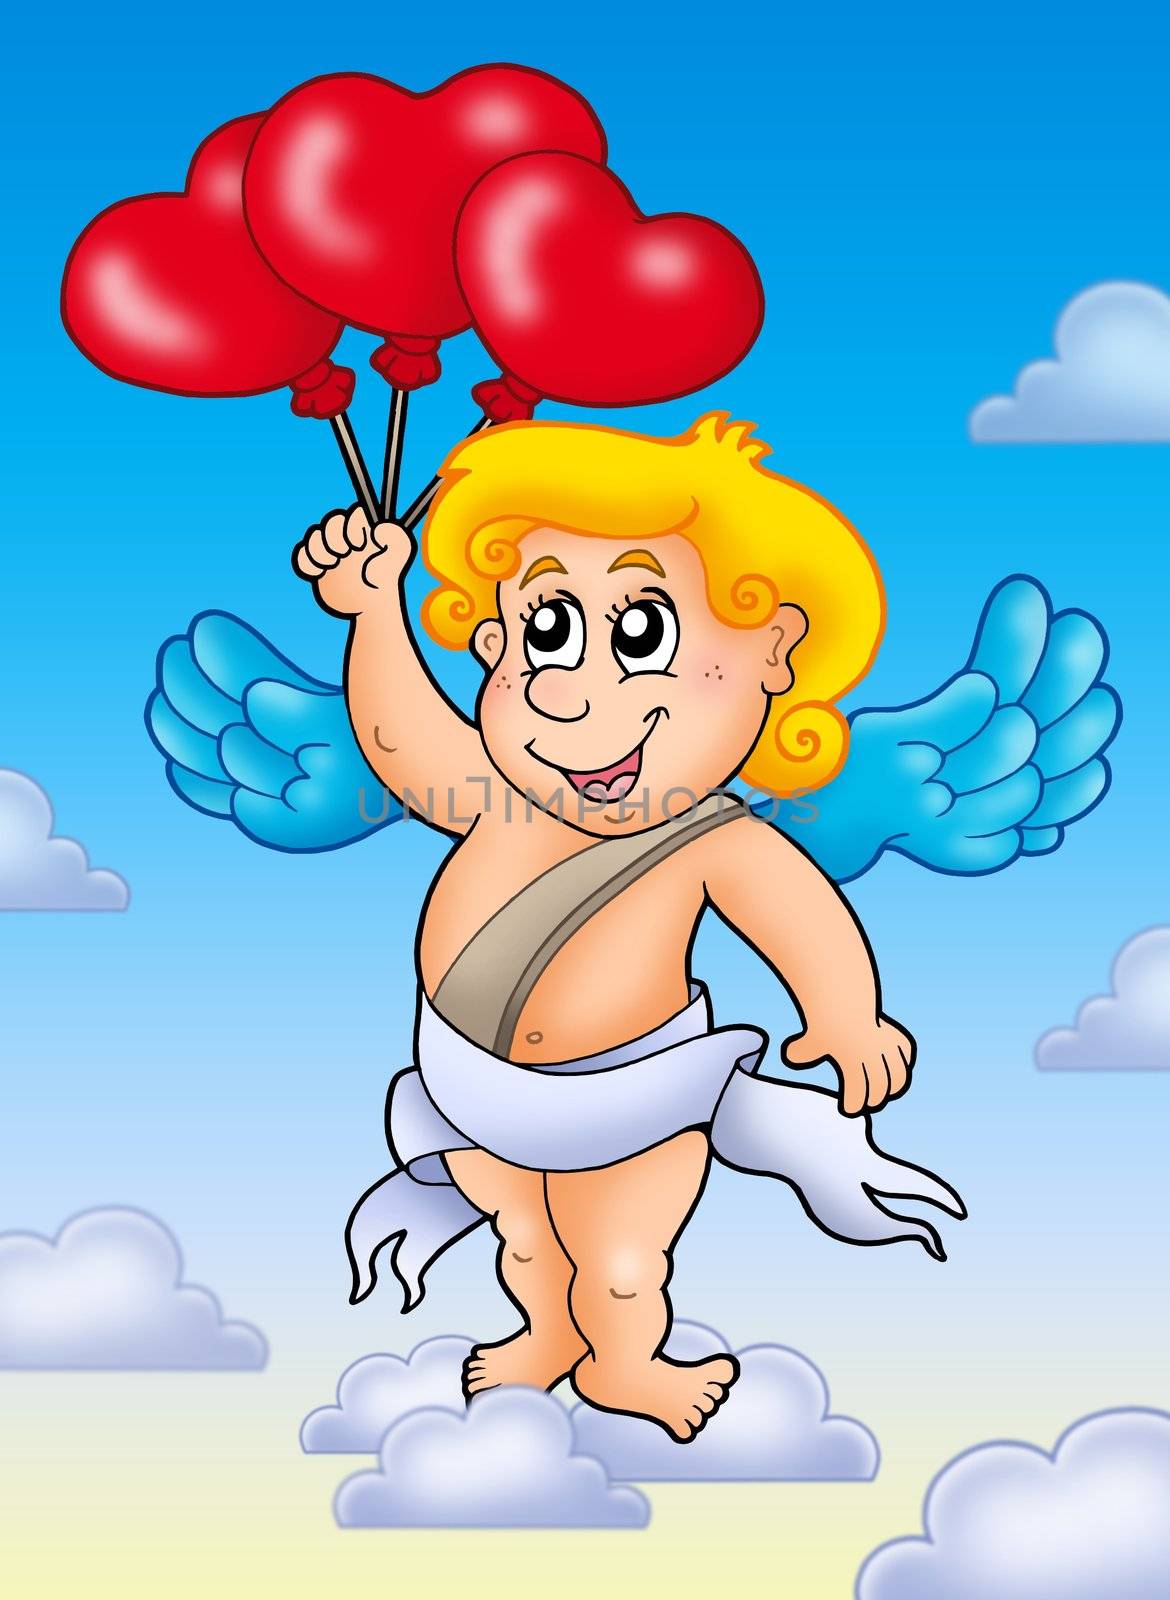 Cupid with balloons on blue sky by clairev